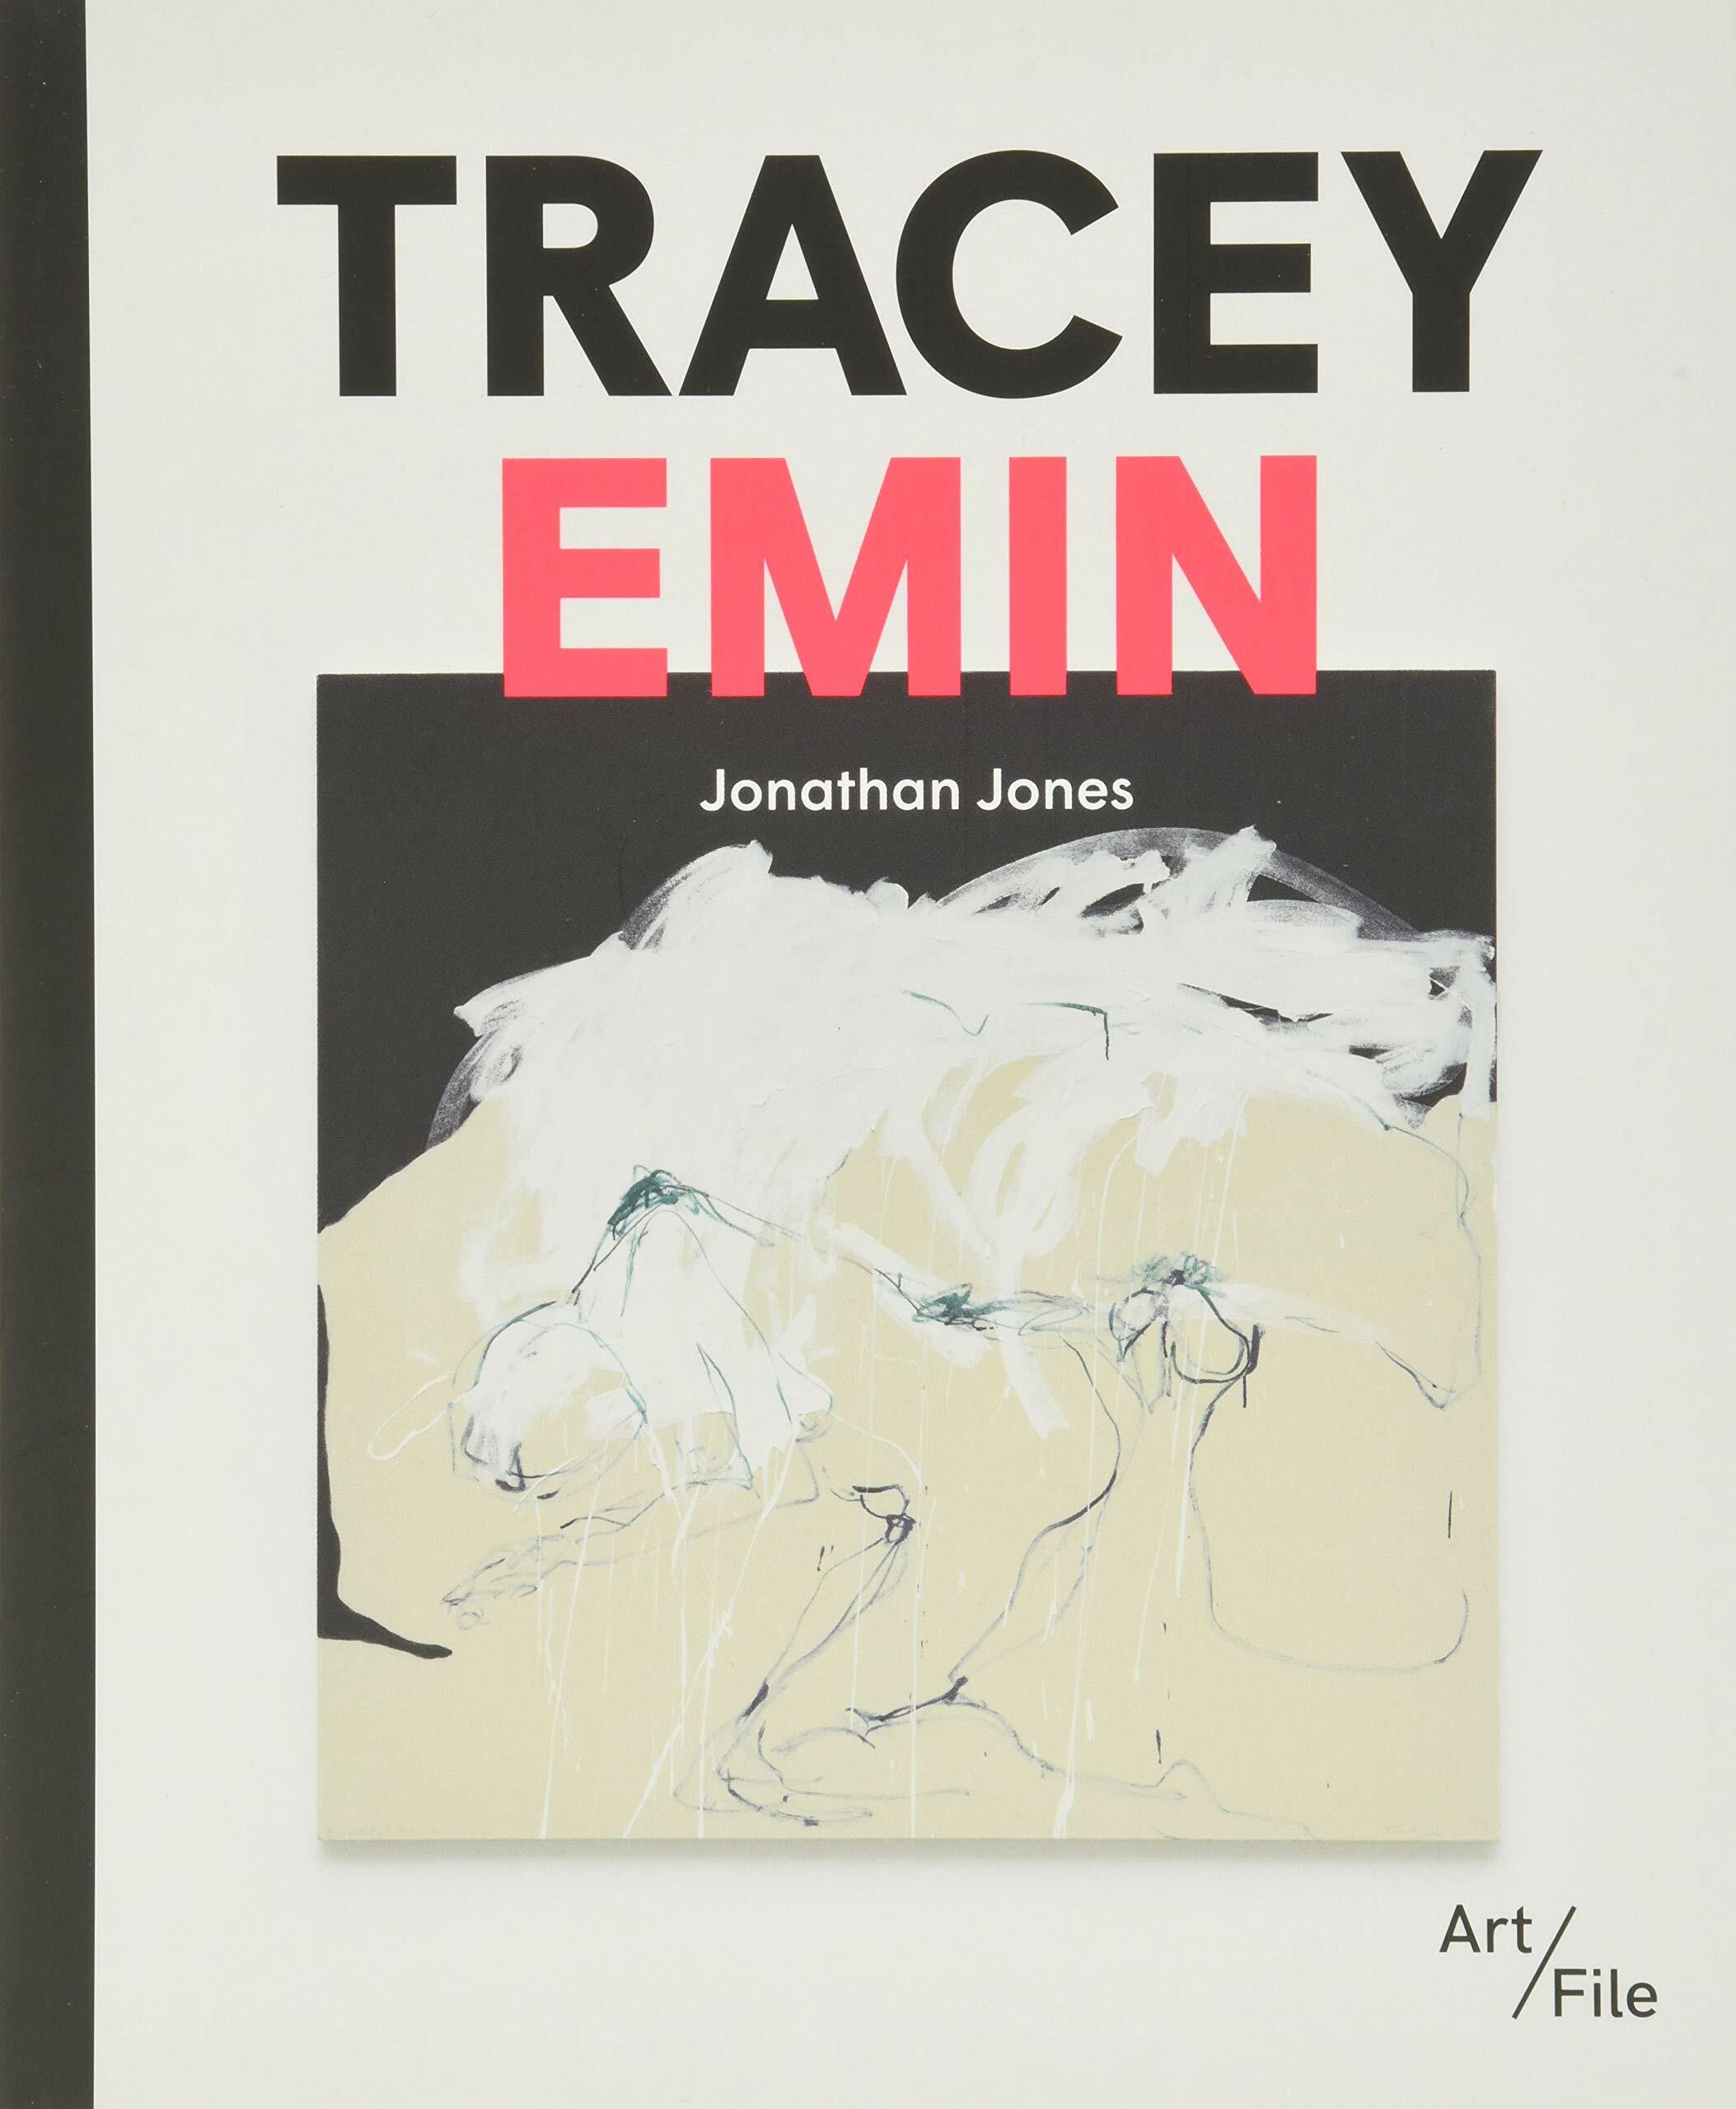 Tracey Emin (Paperback)